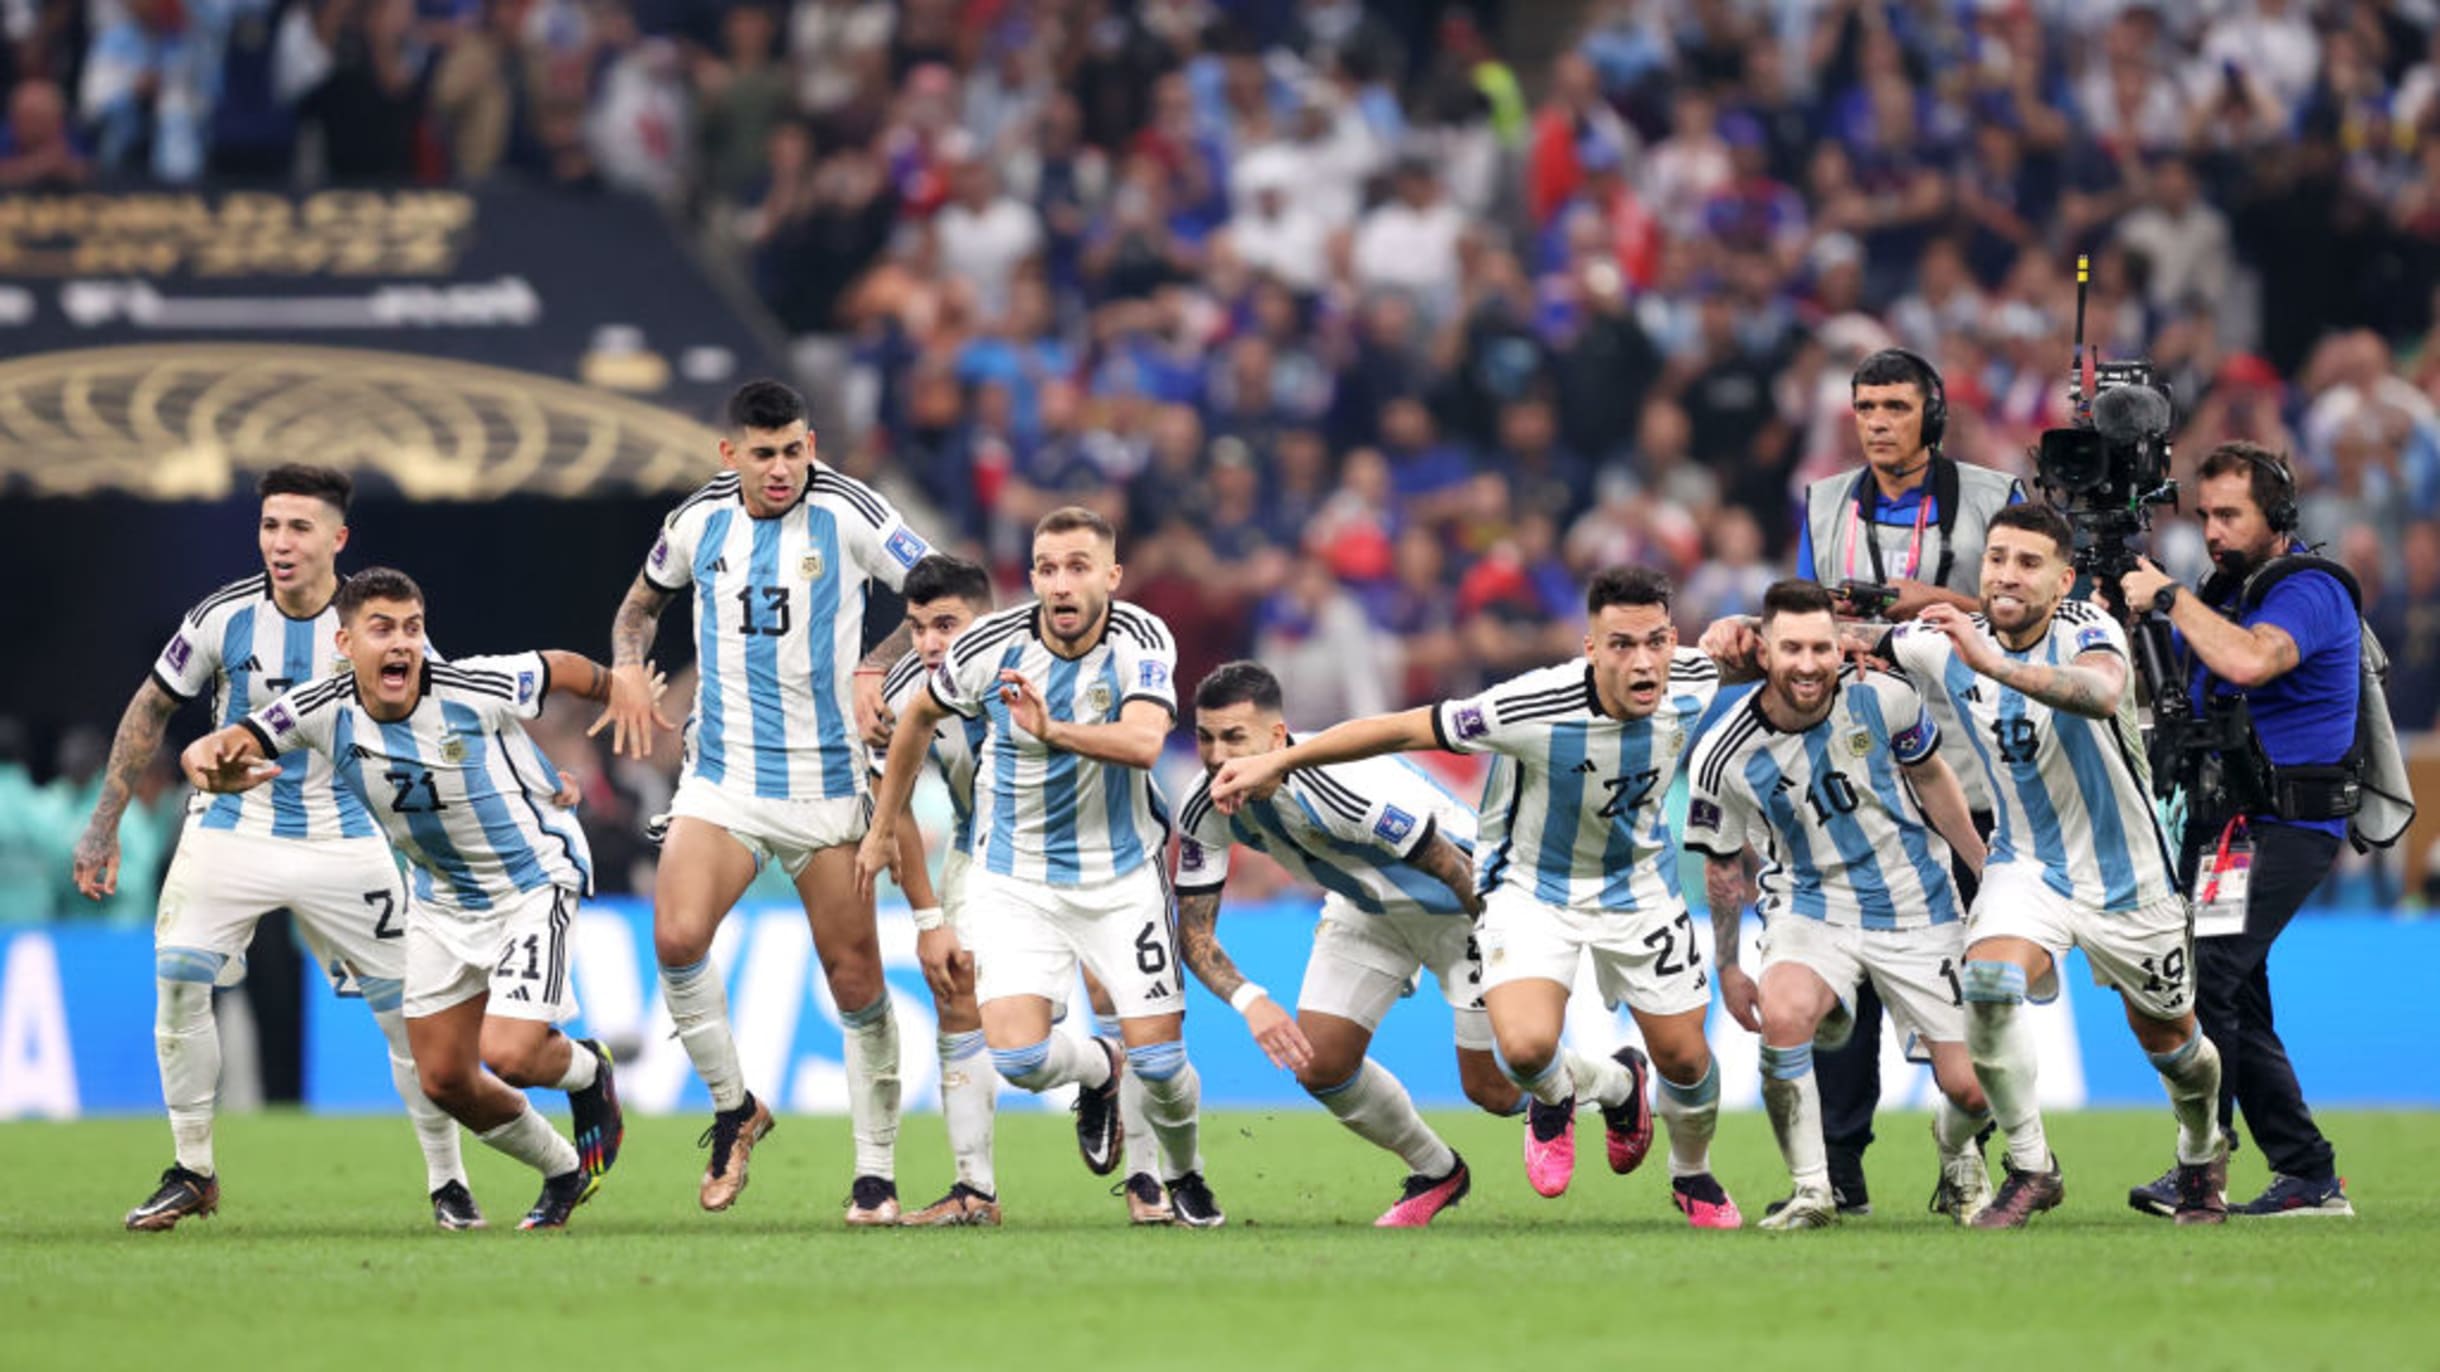 Argentina vs France, 2022 FIFA World Cup final Get live scores, results and football match updates here